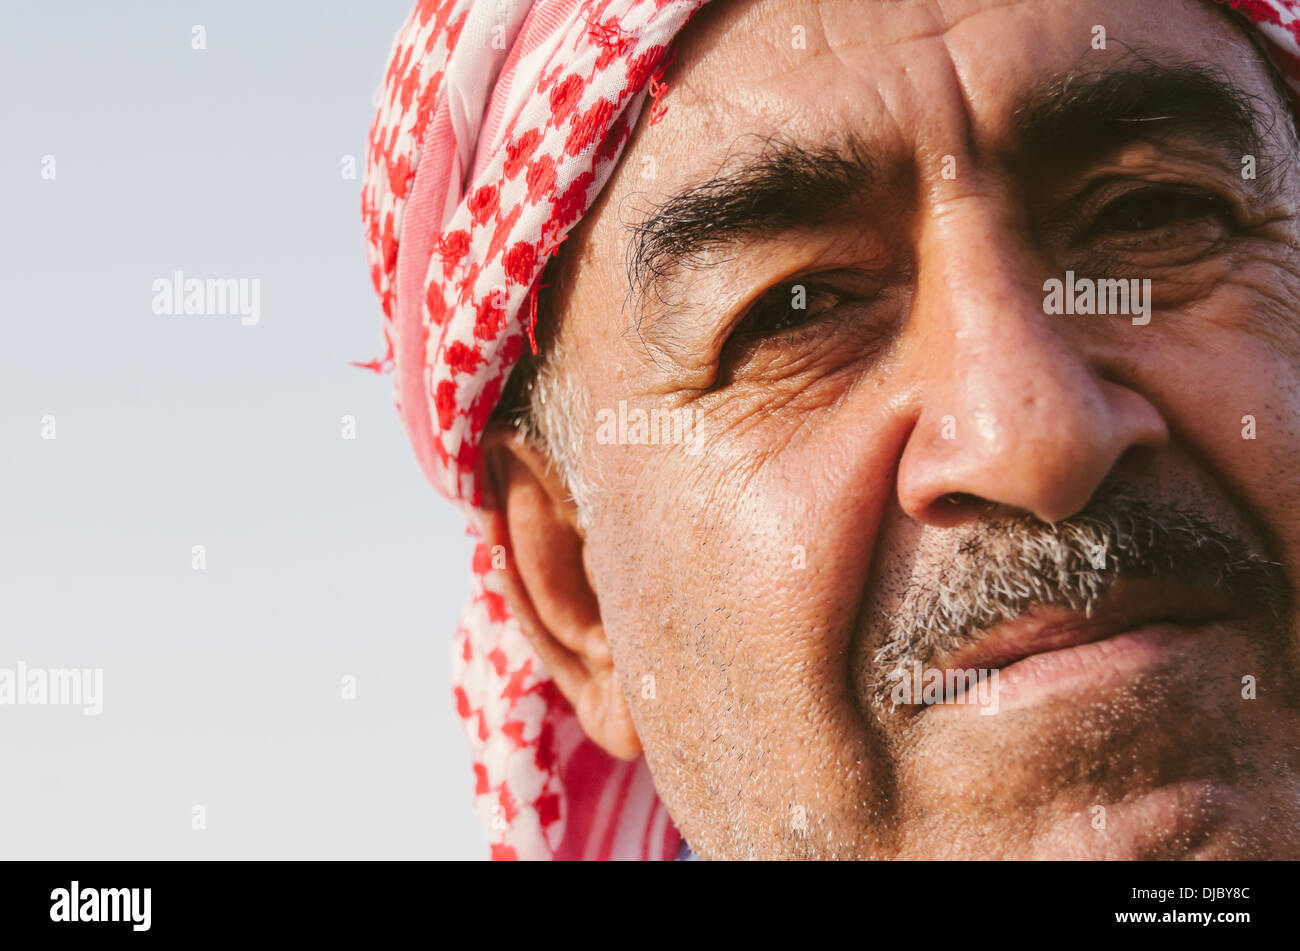 Portrait of Arab man wearing a shemagh with it's distinctive red and white checkered pattern. Dubai, UAE. Stock Photo